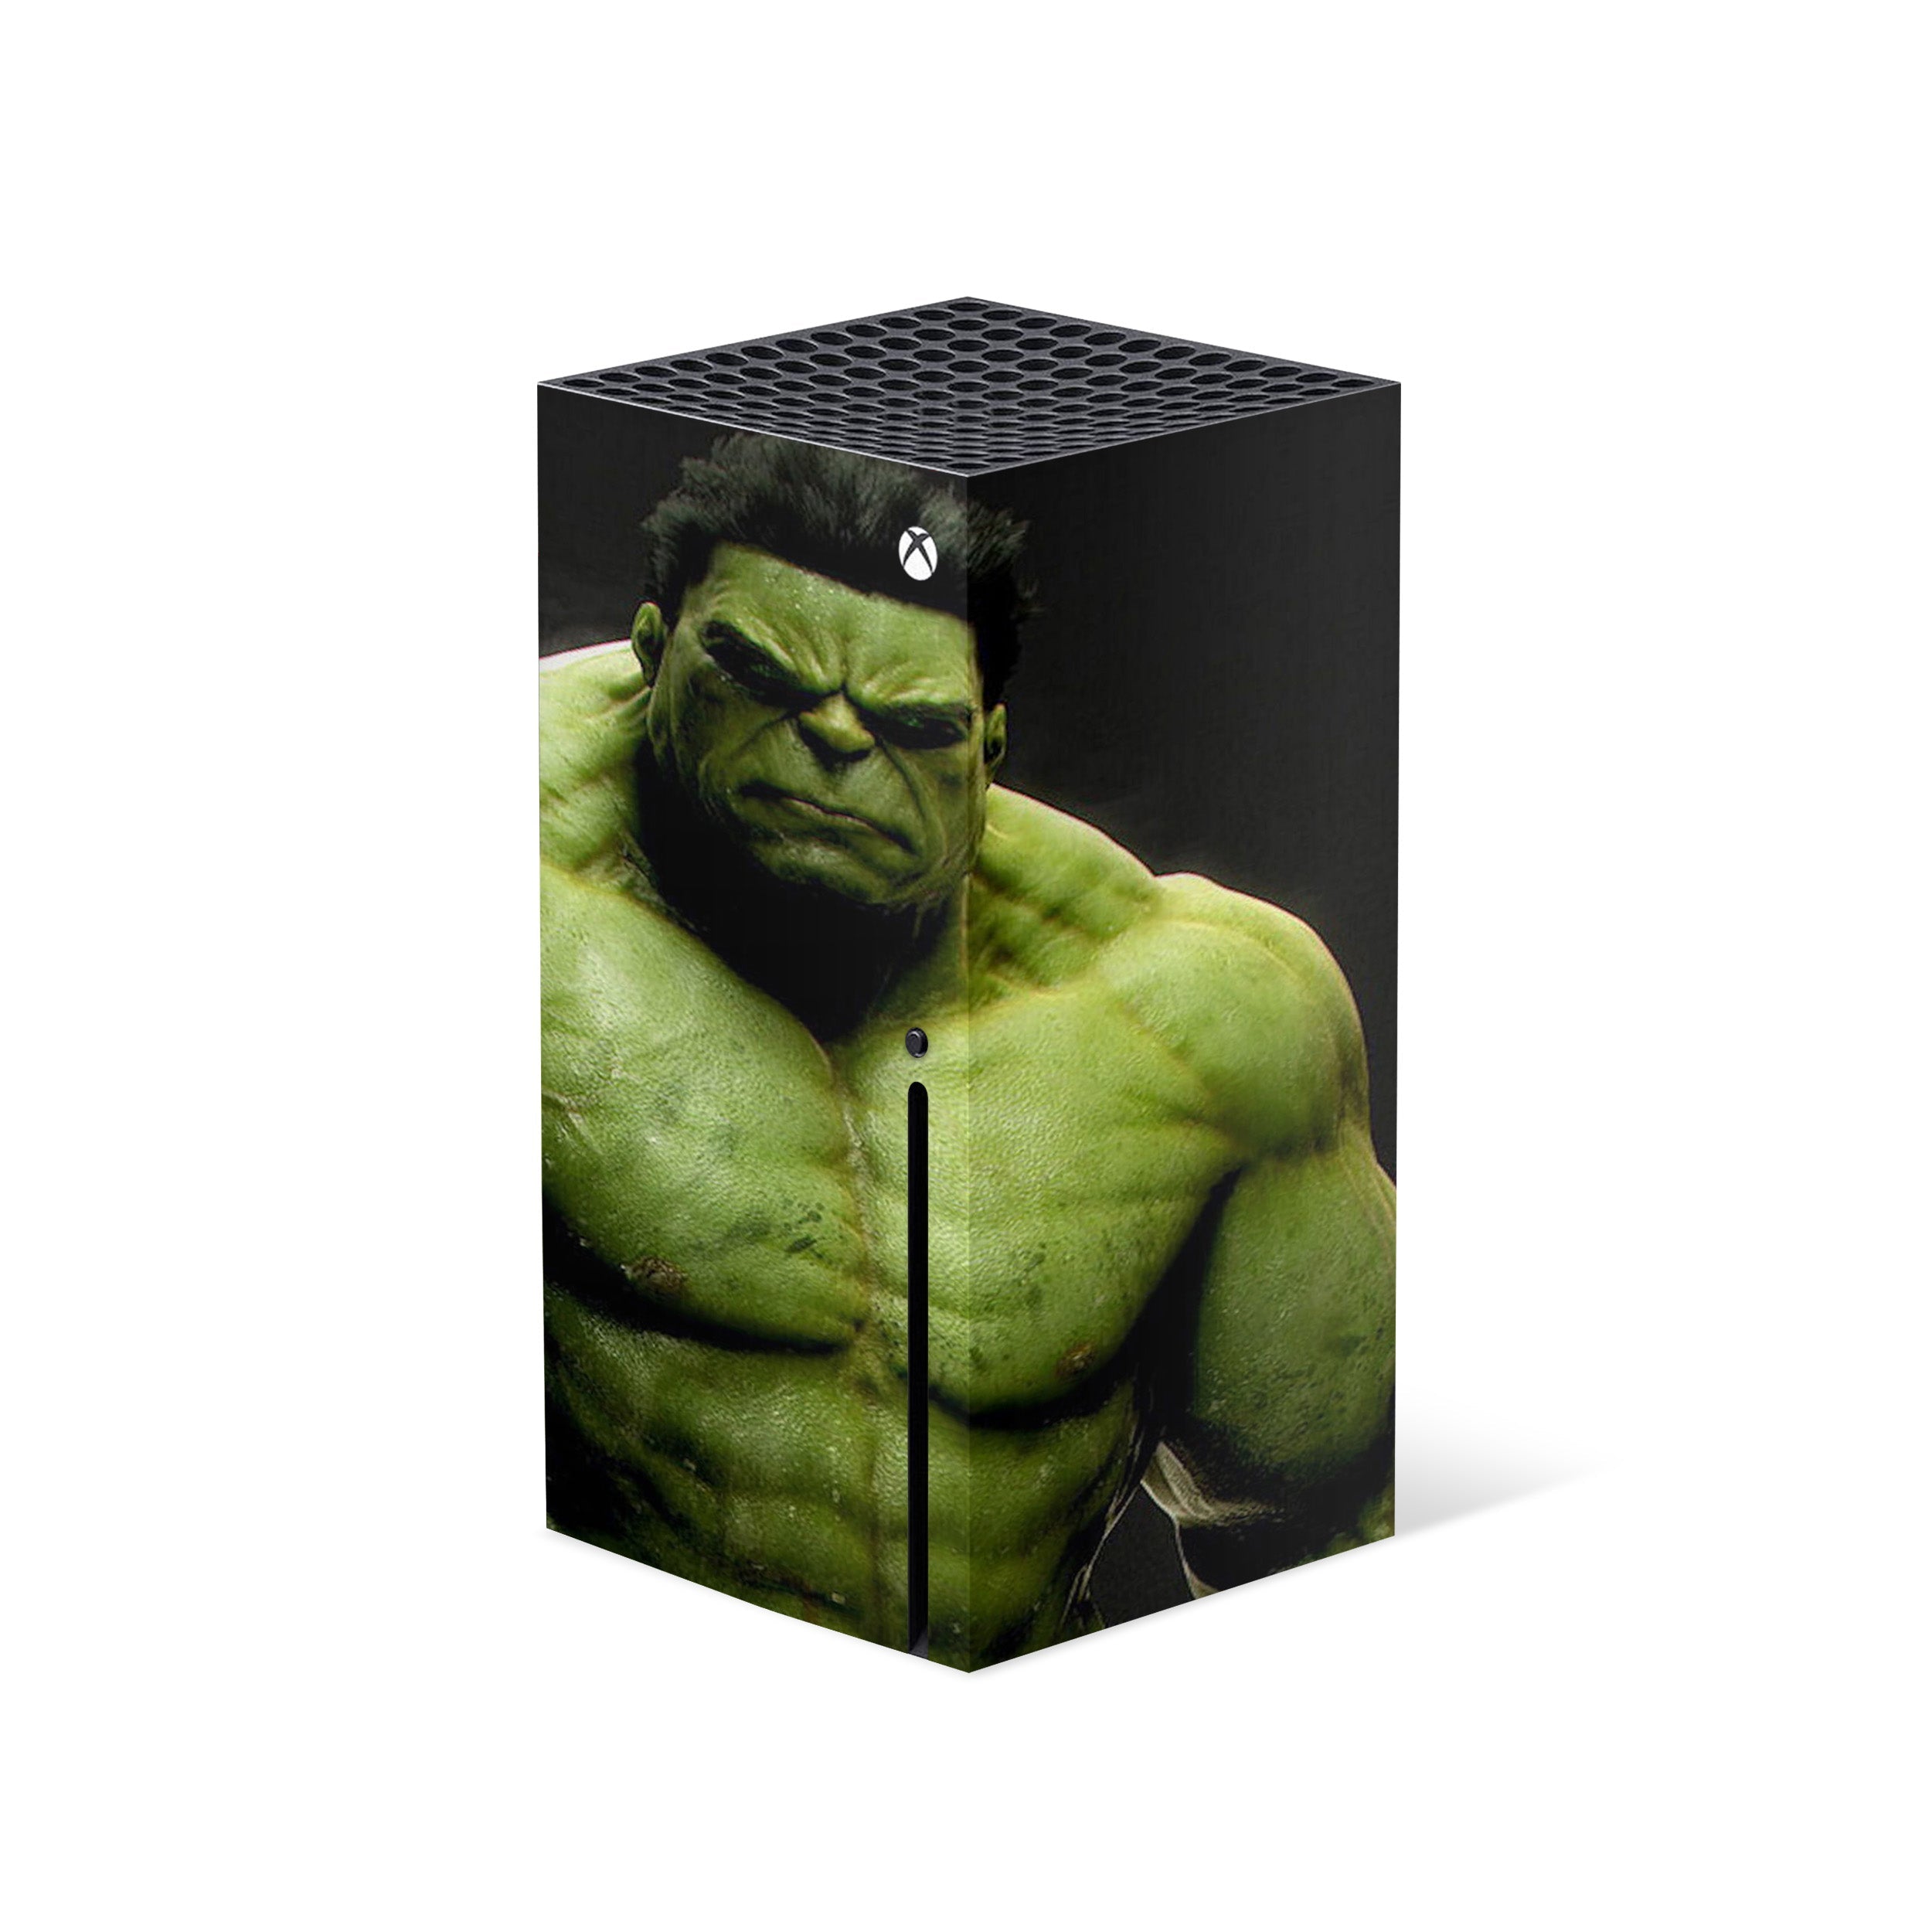 A video game skin featuring a Marvel Comics Hulk design for the Xbox Series X.